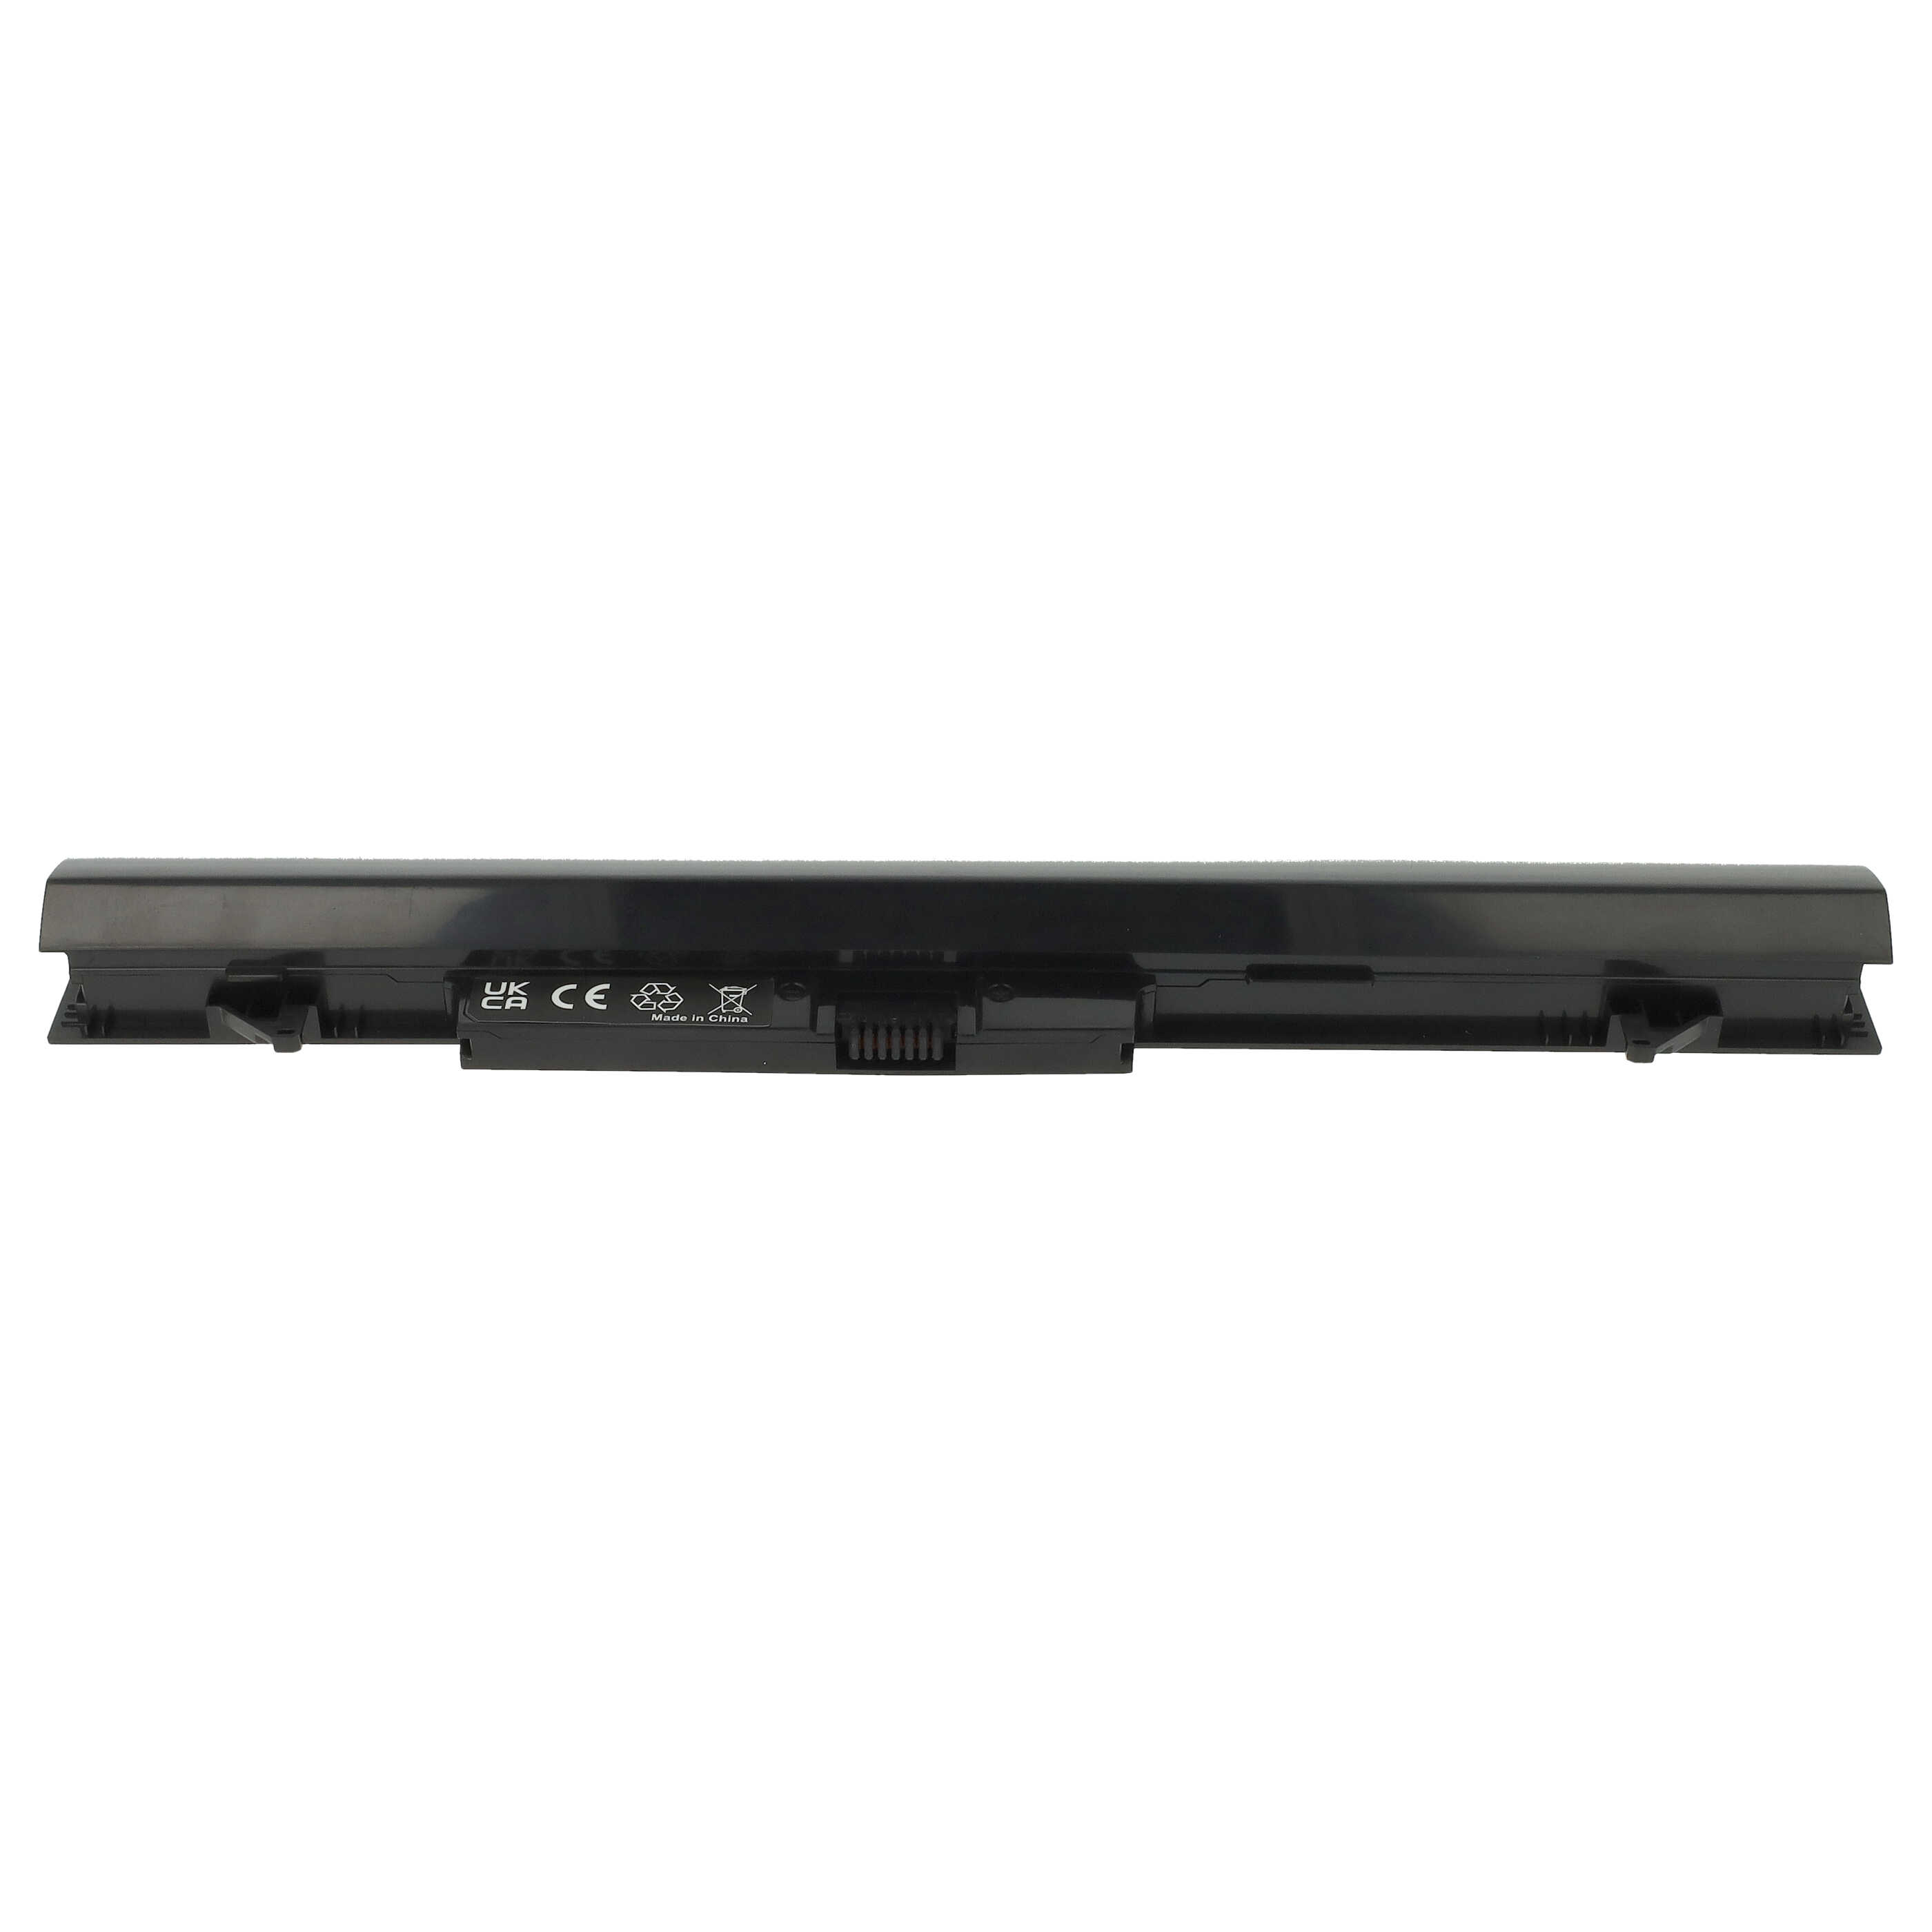 Notebook Battery Replacement for HP H6L28AA, 768549-001, HSTNN-IB4L, 707618-121 - 2600mAh 14.8V Li-Ion, grey